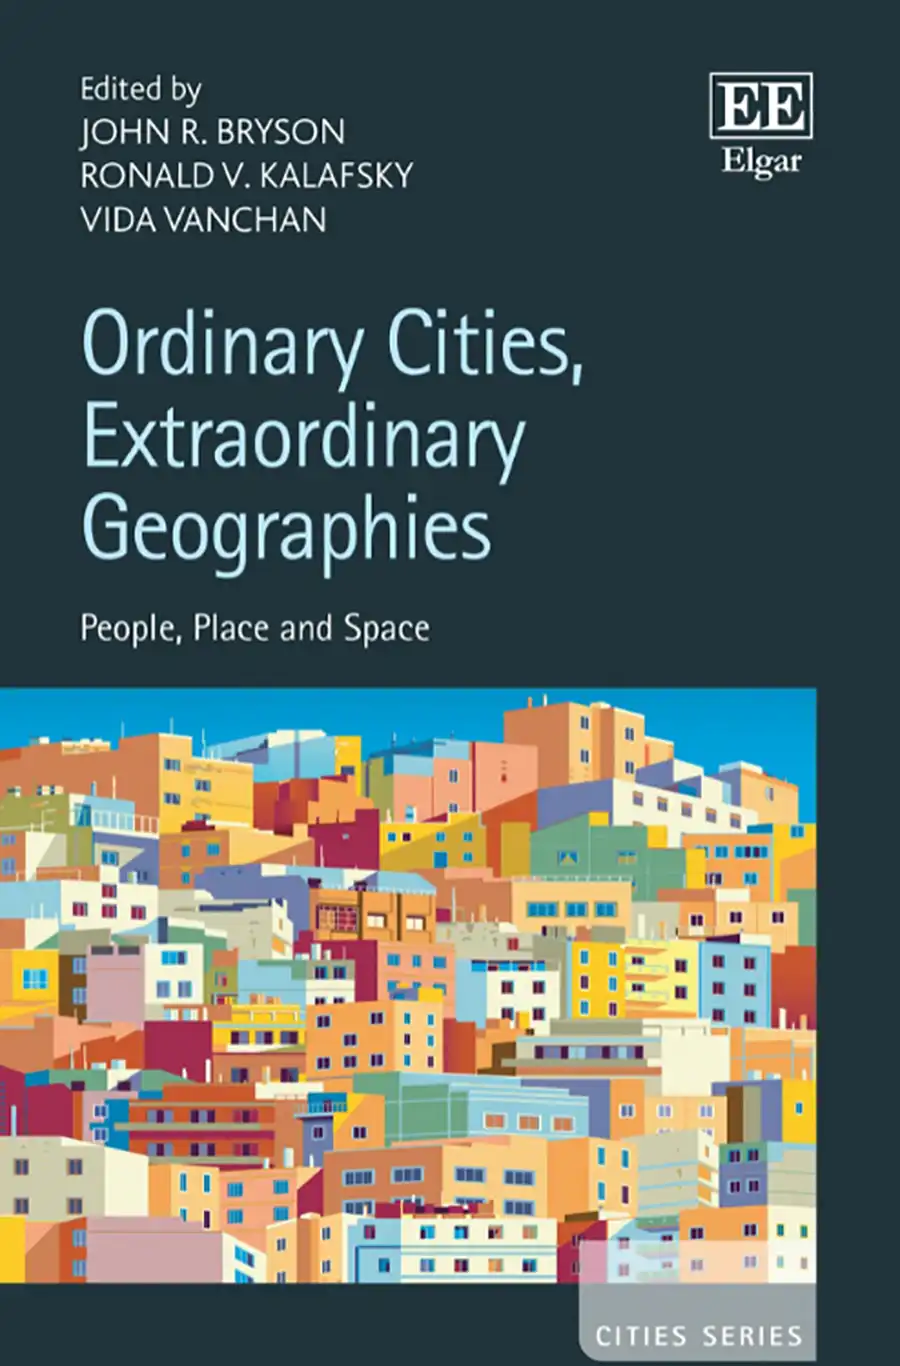 Book jacket for Ordinary Cities, Extraordinary Geographies